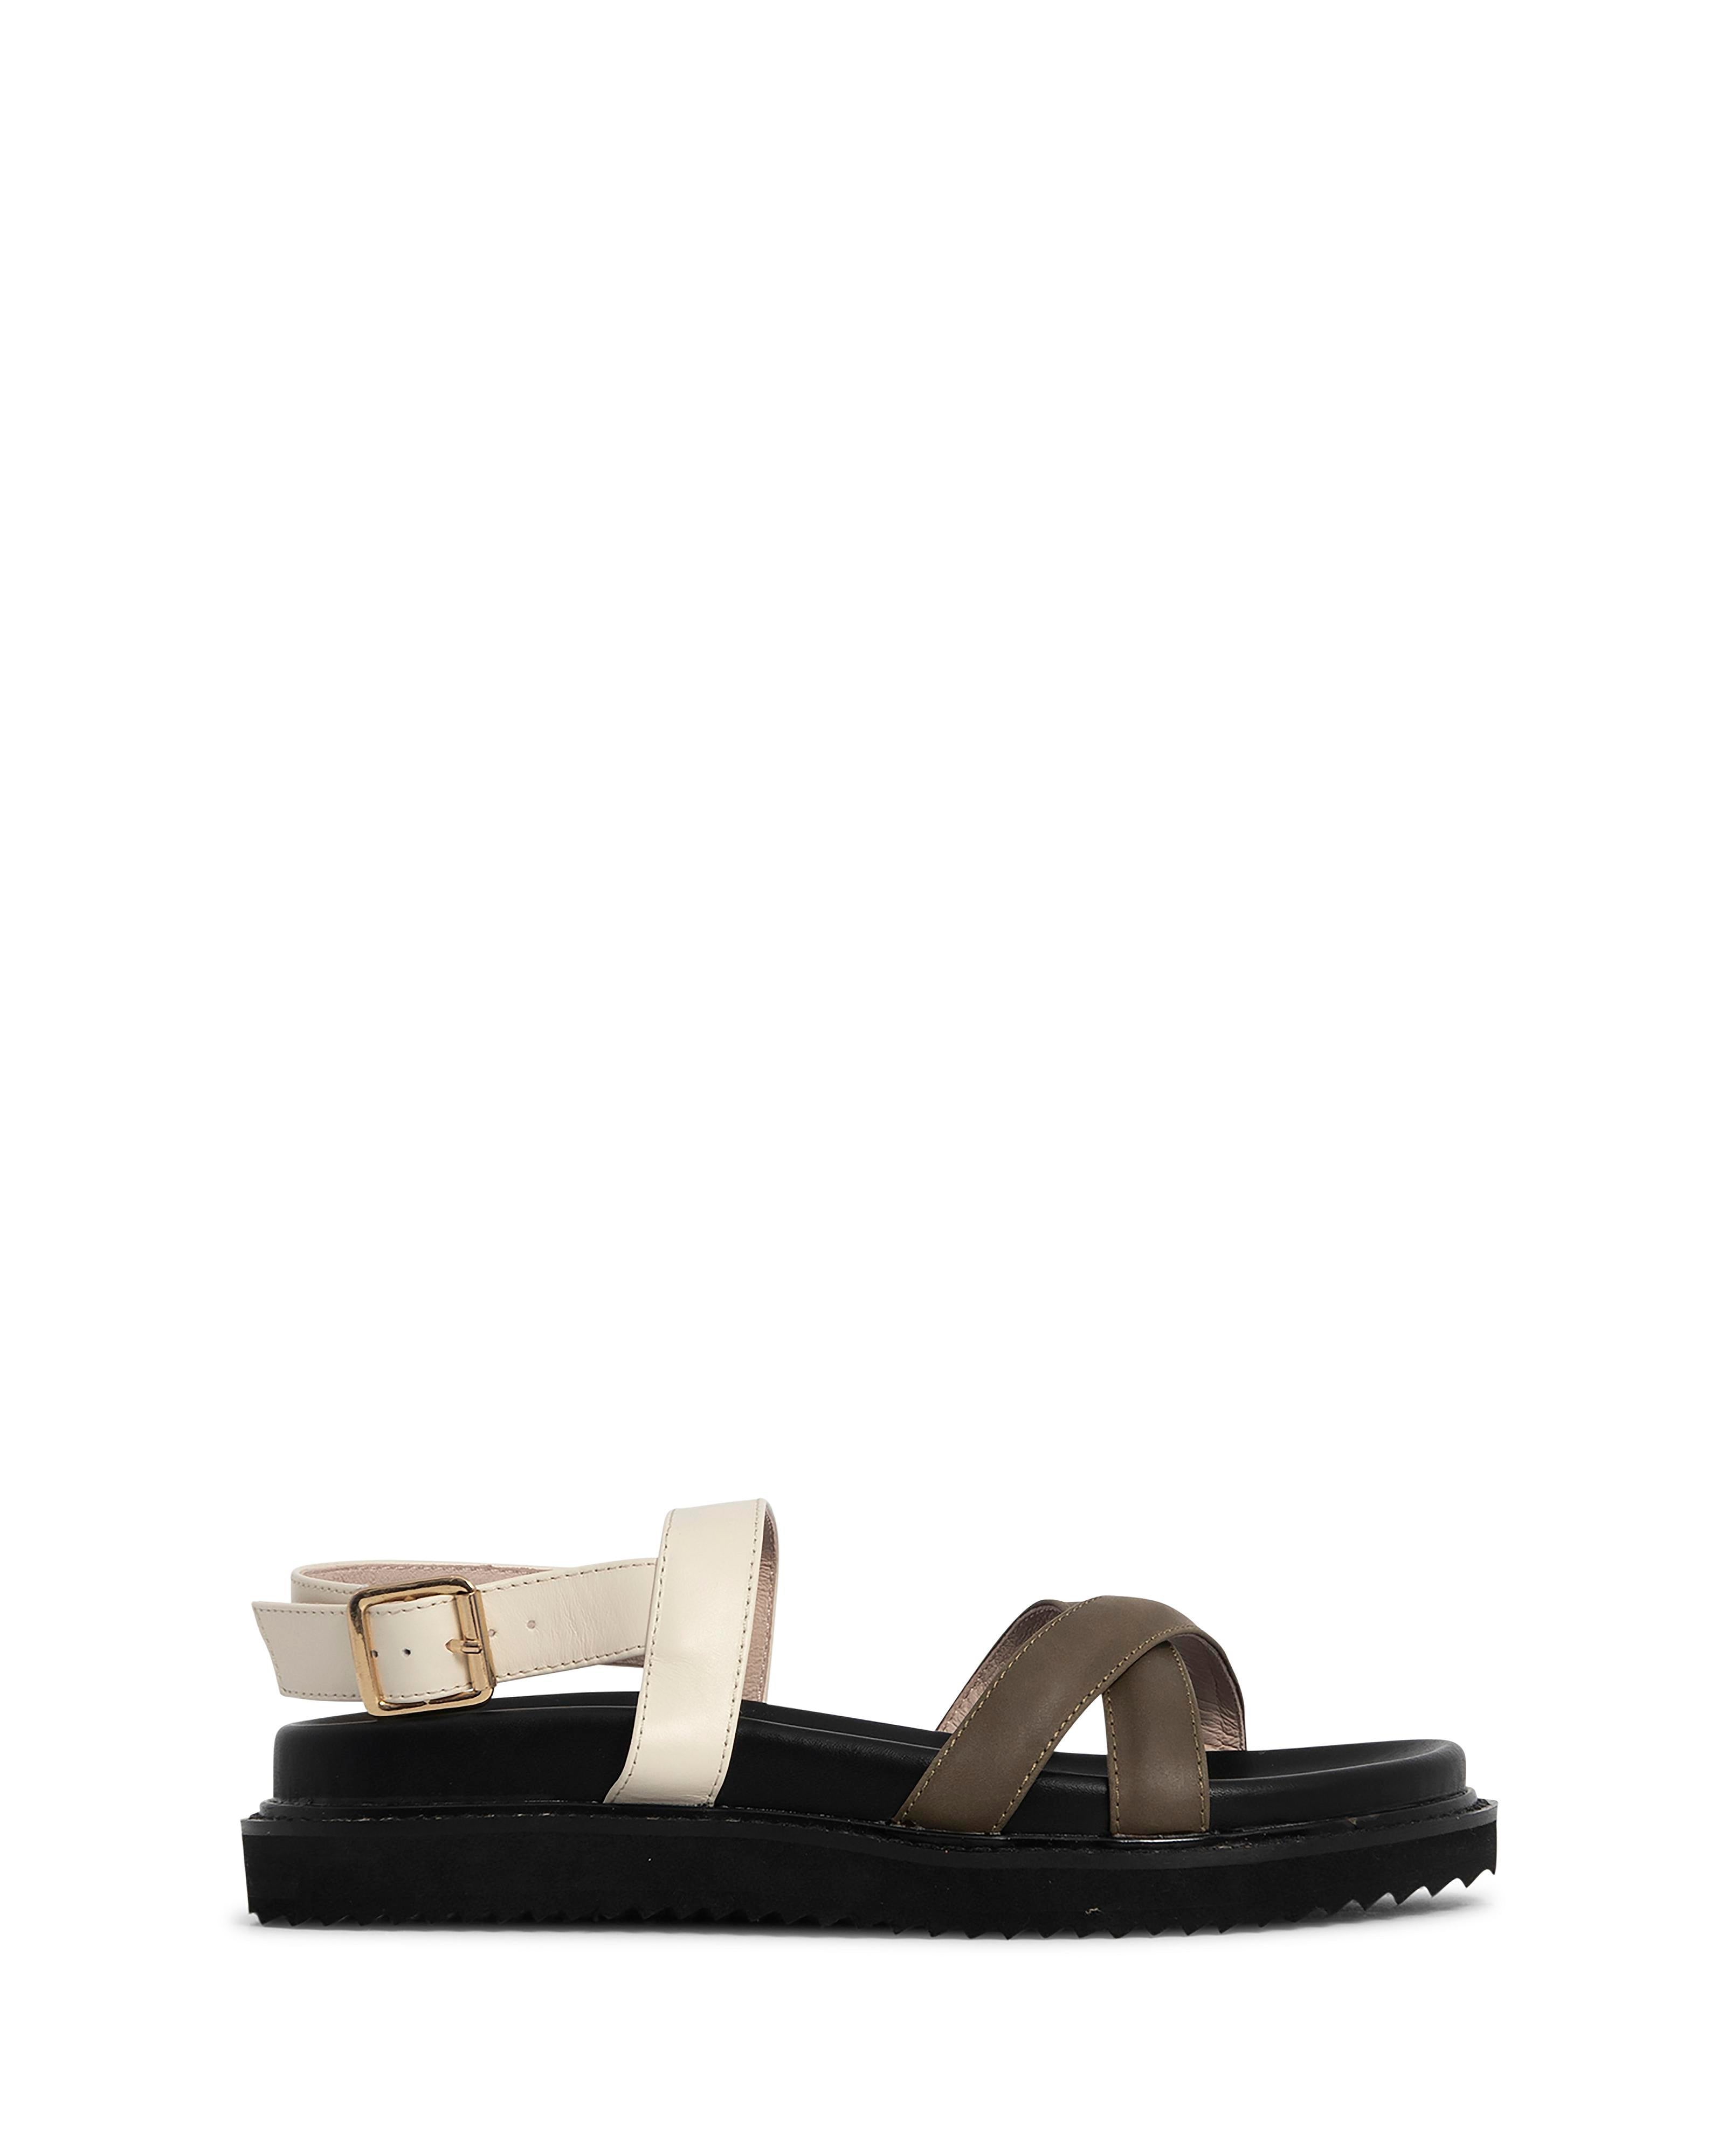 Marlowe Olive/White 2cm Sole Sandal with Adjustable Gold Buckle 